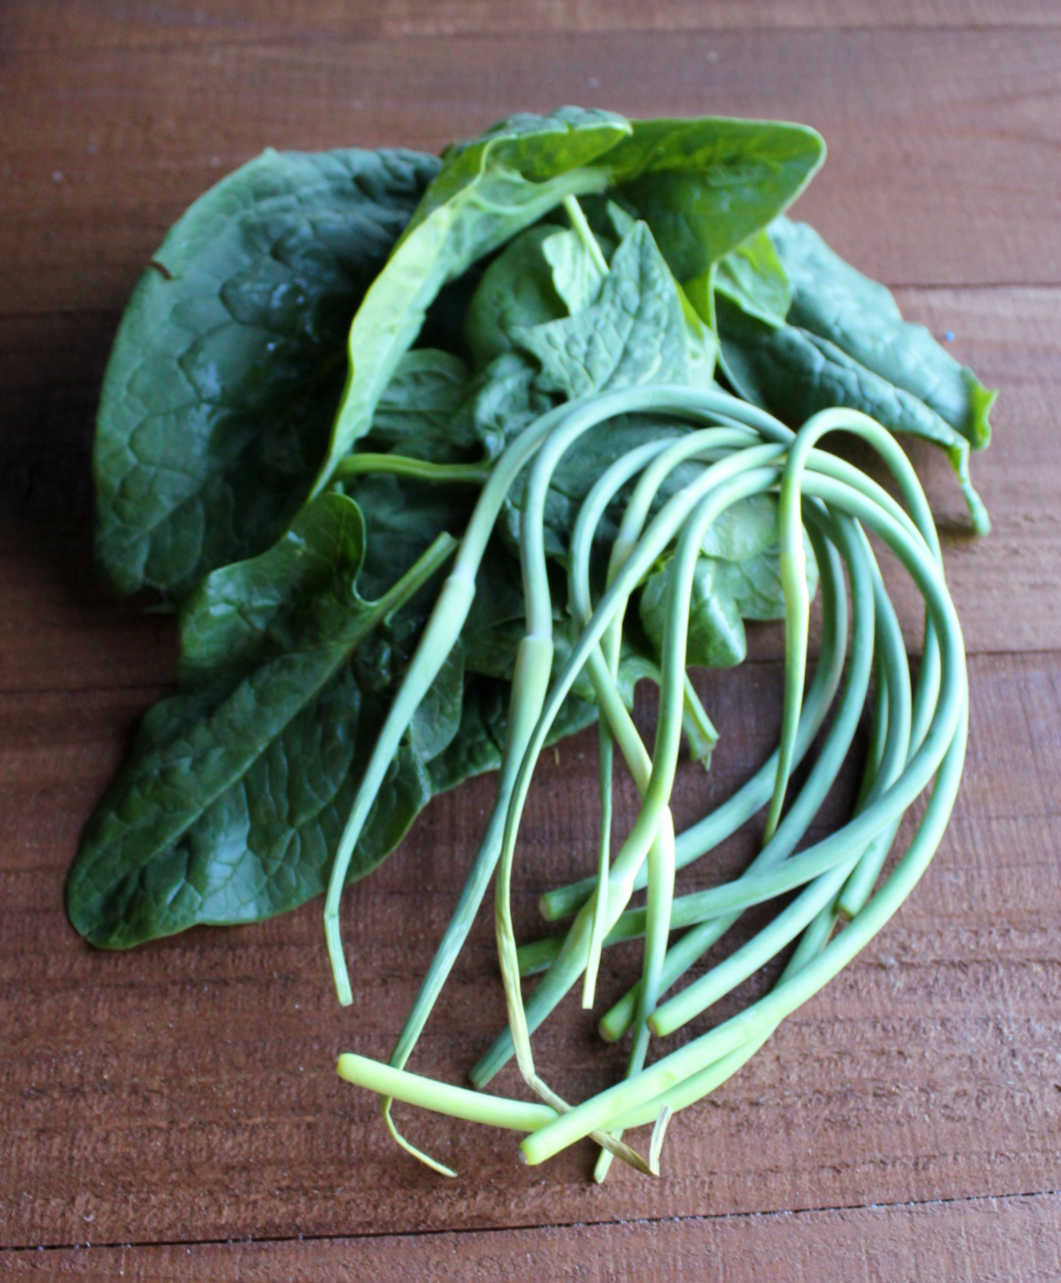 fresh garlic scapes and large leaves of spinach.